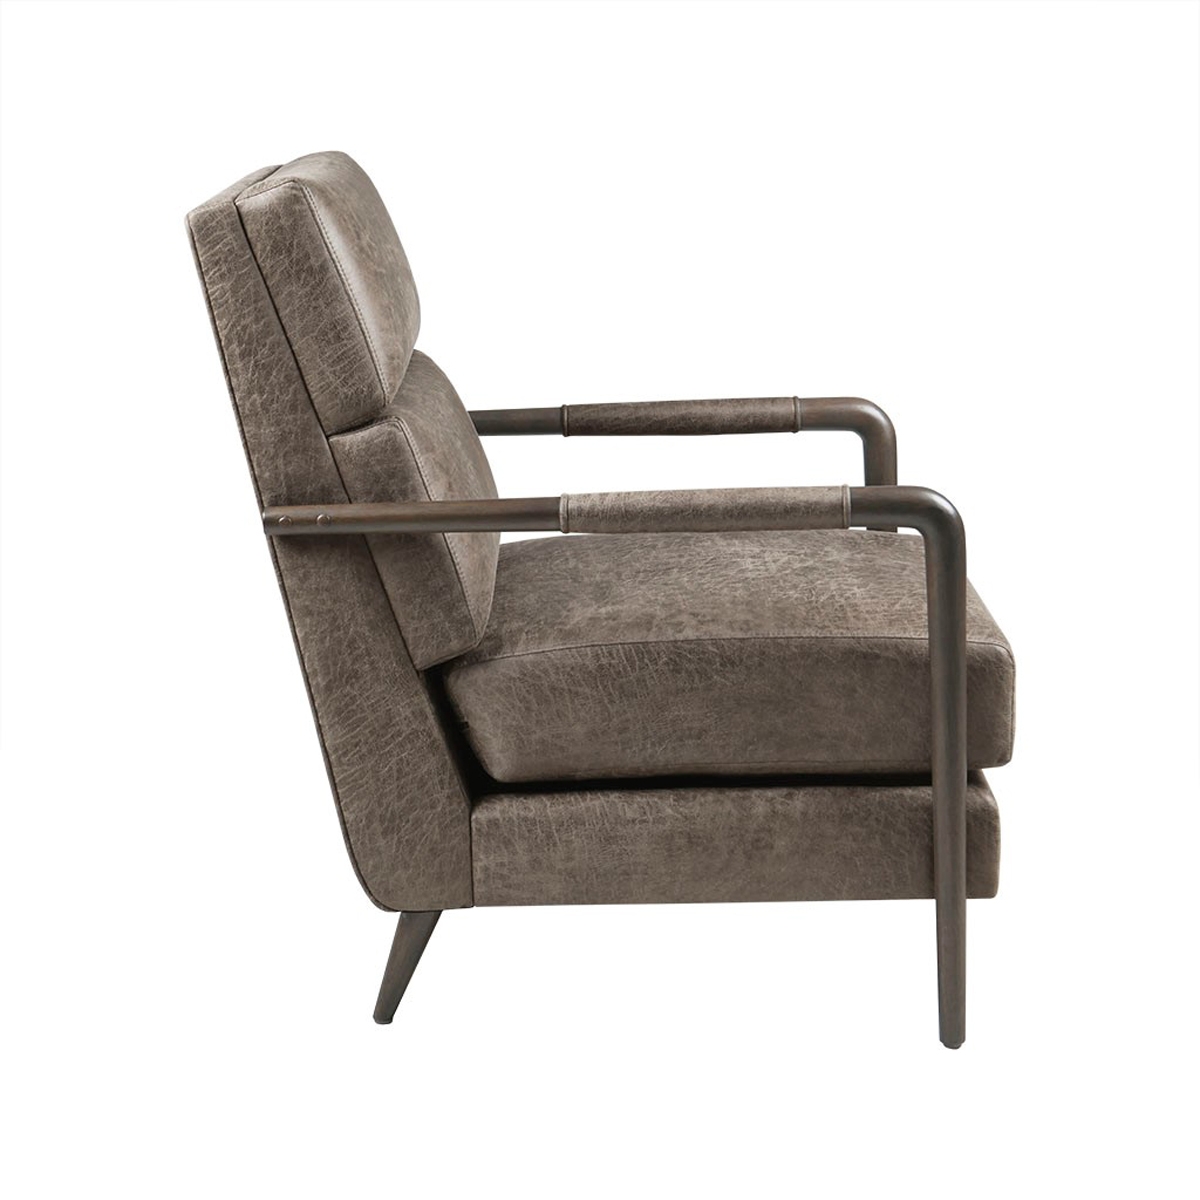 Picture of DEGRAW FAUX LEATHER ARMCHAIR